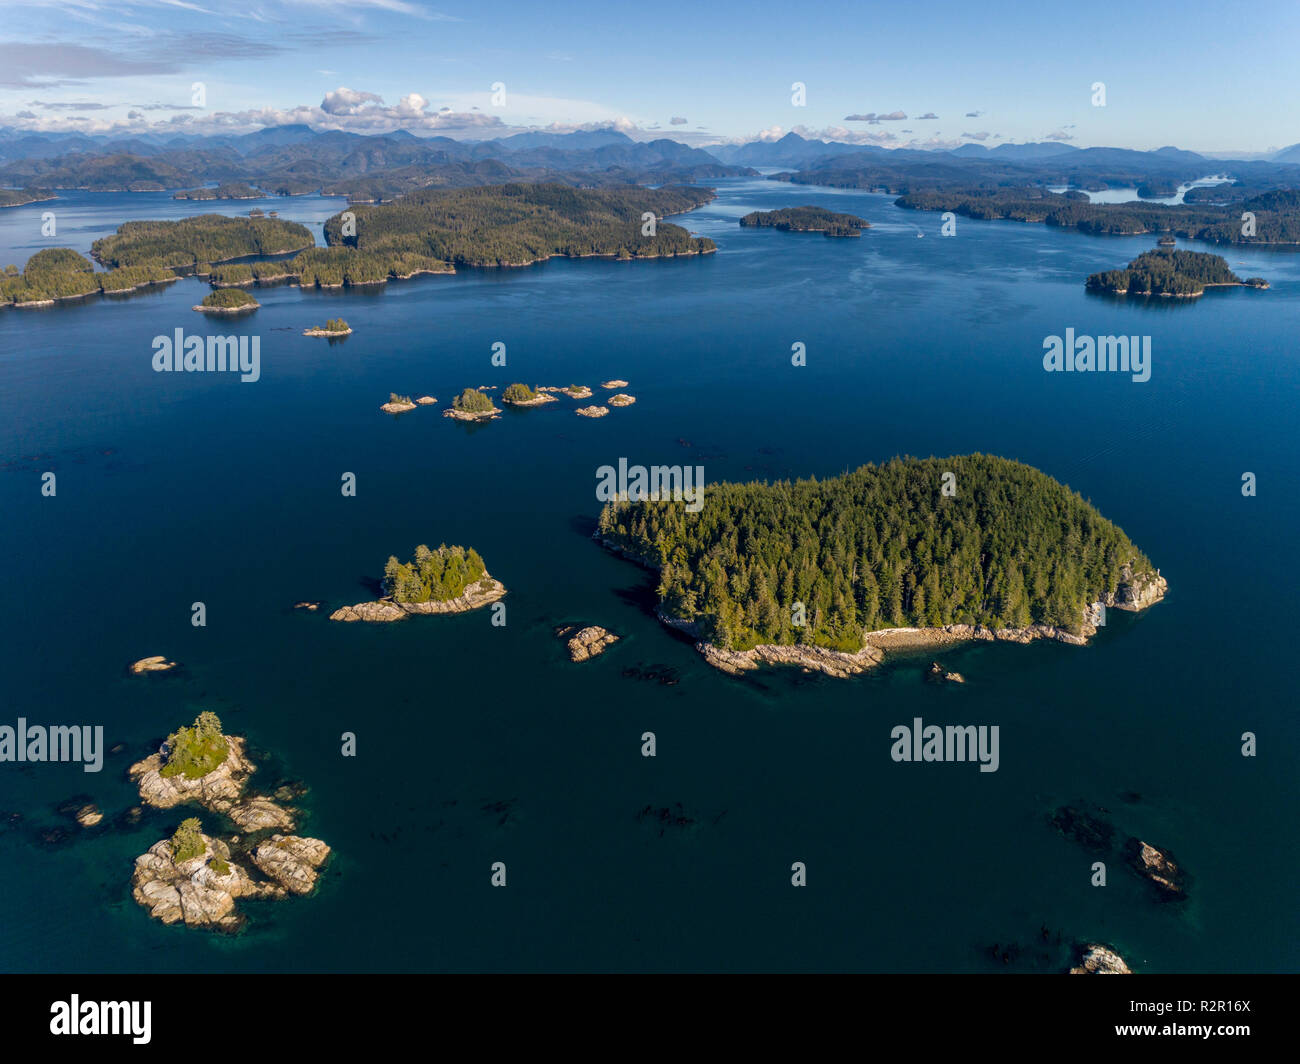 Aerial photograph of the Broughton Archipelago Marine Park and the entrance of Knight Inlet, First Nations Territory, British Columbia, Canada Stock Photo